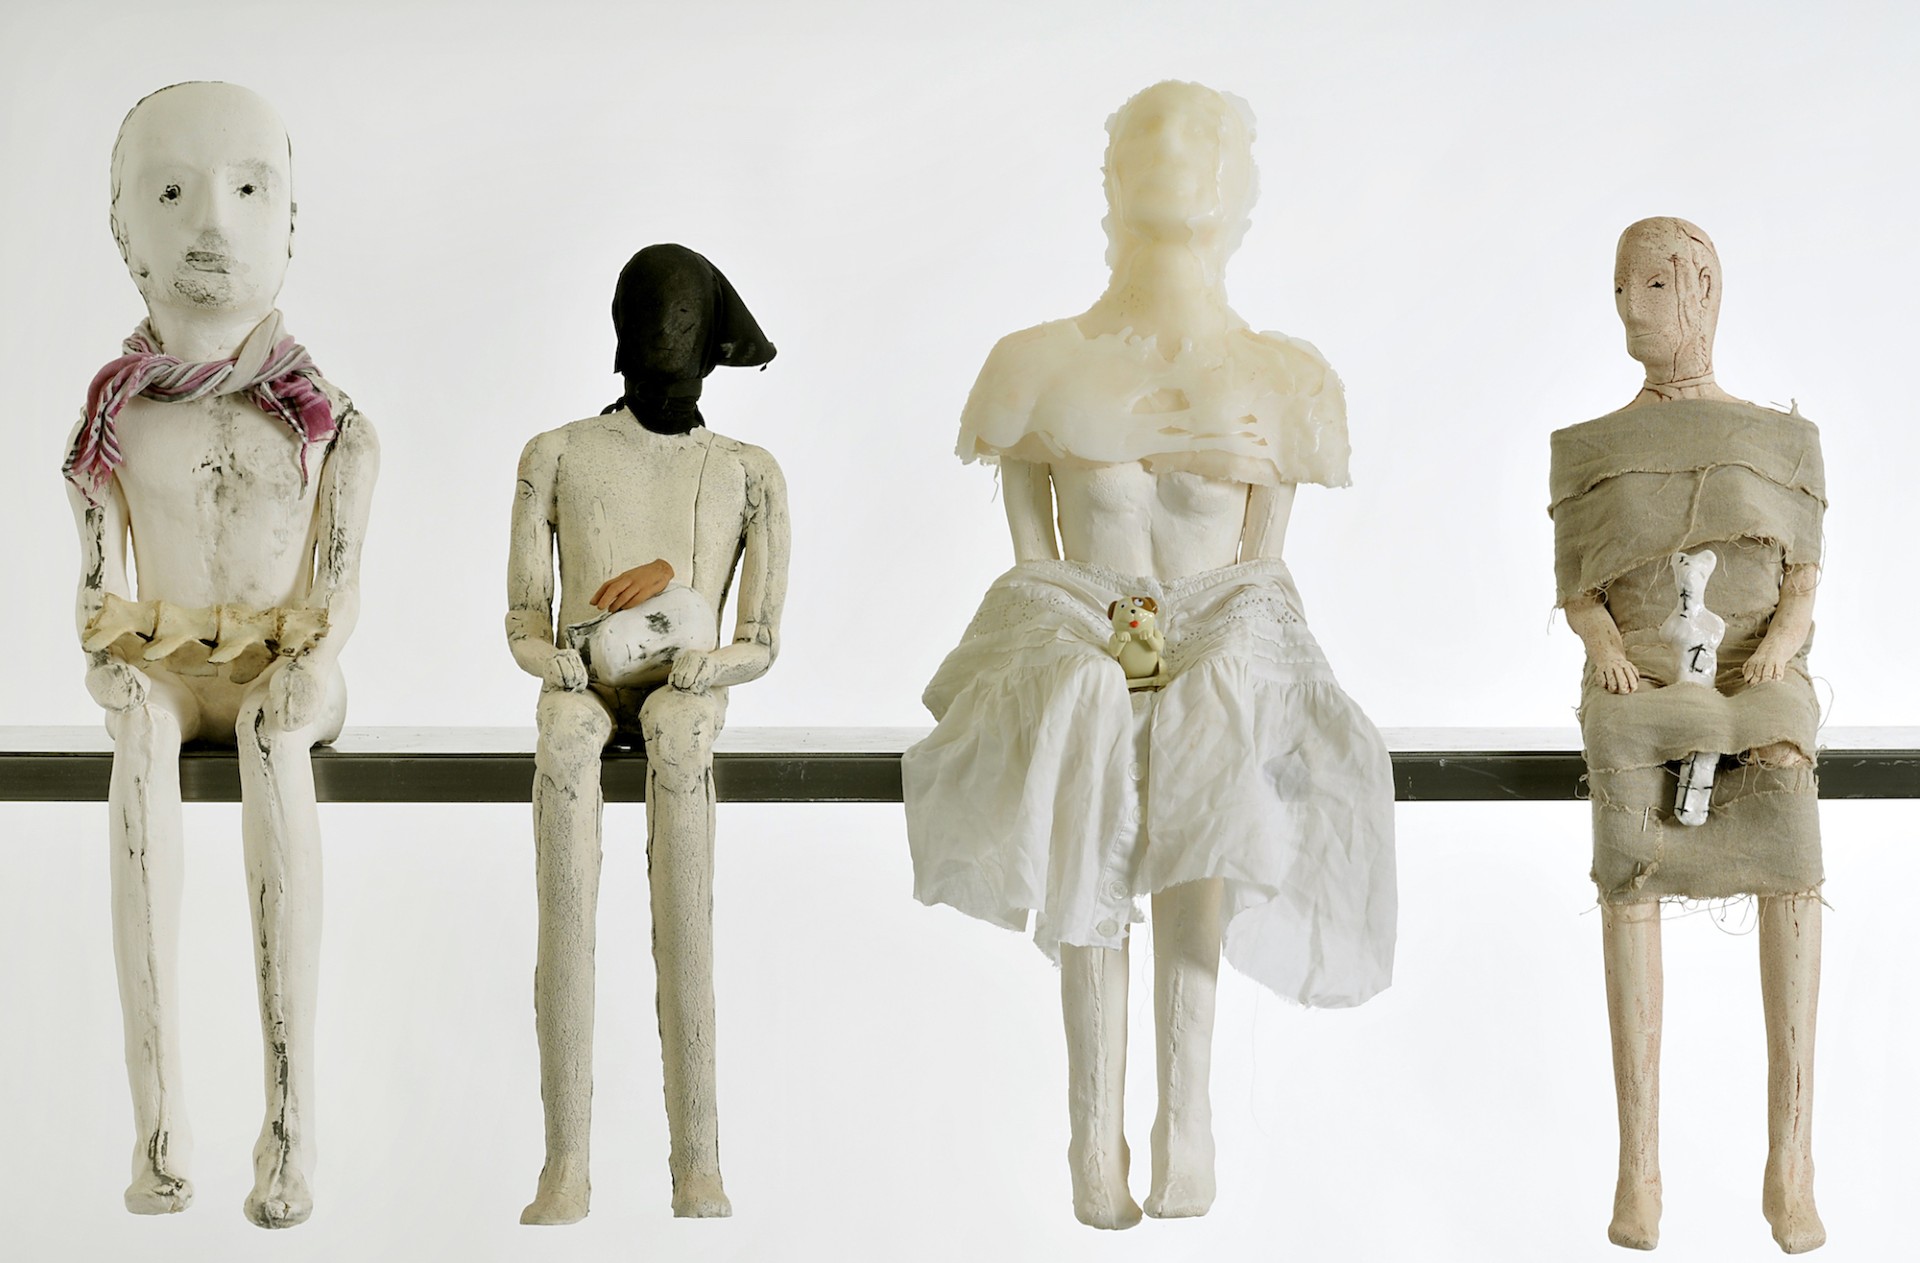 photograph of 4 clay figures sitting on a ledge. Figures made by Christie Brown